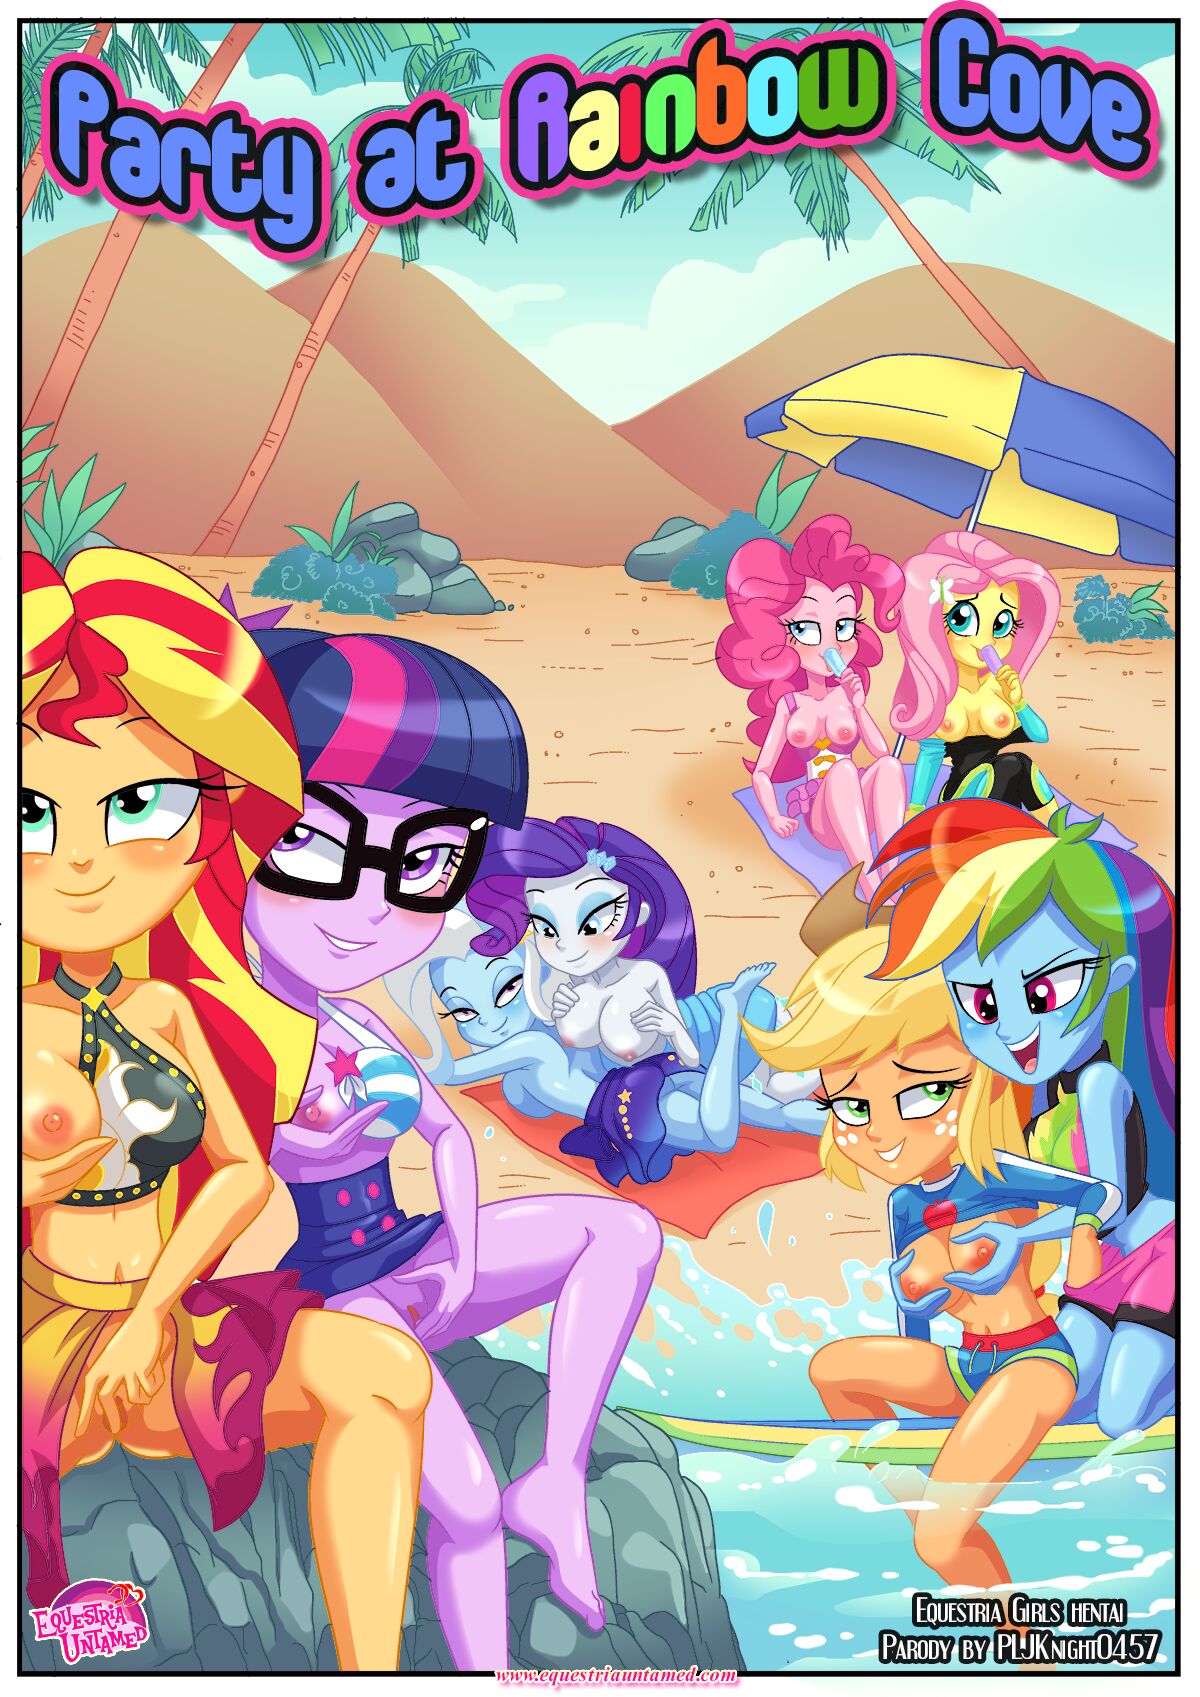 Rule 34 Equestria Girls Porn - Party At Rainbow Cove Porn Comics by [Palcomix] (Equestria Girls,My Little  Pony Friendship is Magic) Rule 34 Comics â€“ R34Porn